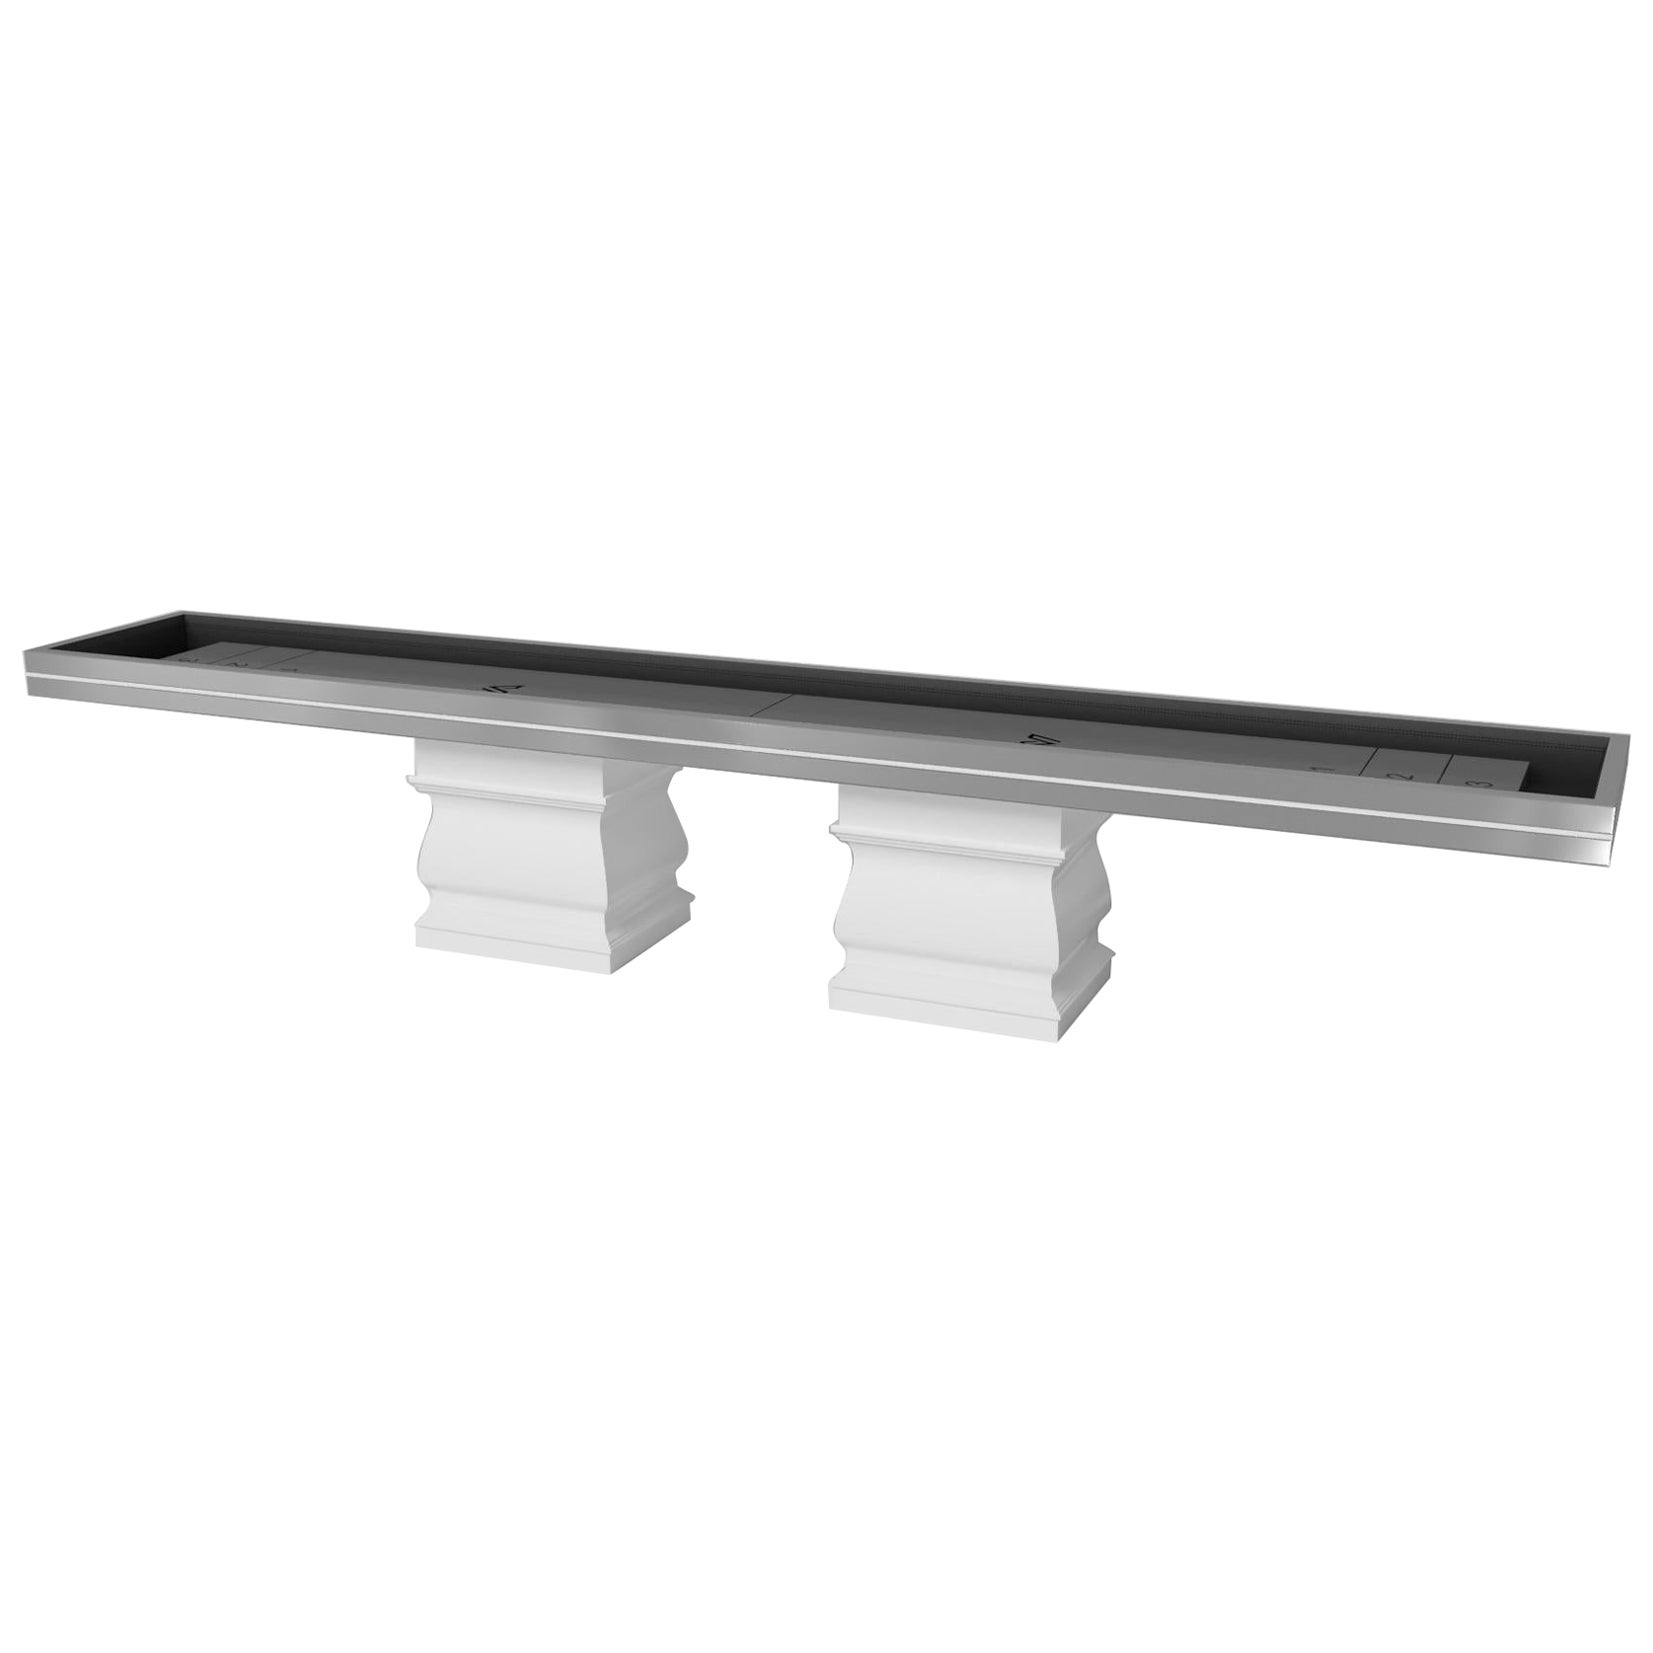 Elevate Customs Baluster Shuffleboard / Stainless Steel Sheet Metal in 22' - USA For Sale